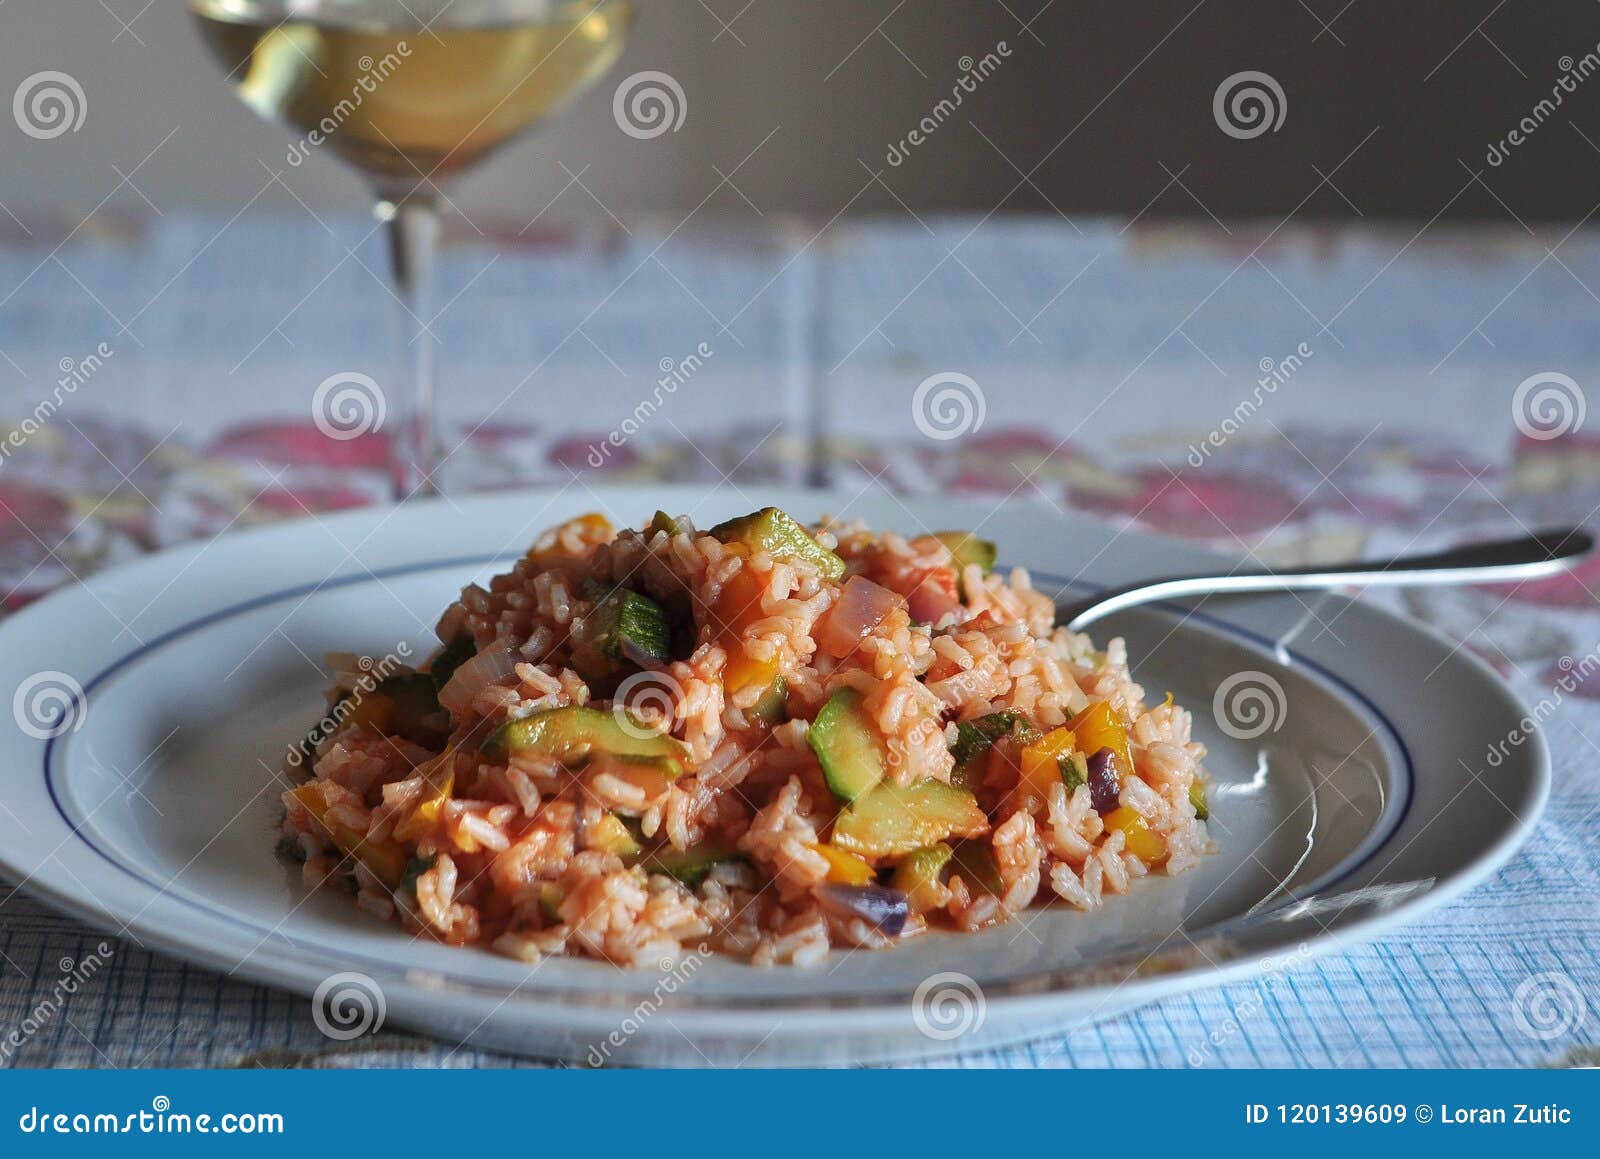 risotto with vegetables zucchini, yellow pepper, red onion and some of tomato sauce ... with a glass of pinot grigio